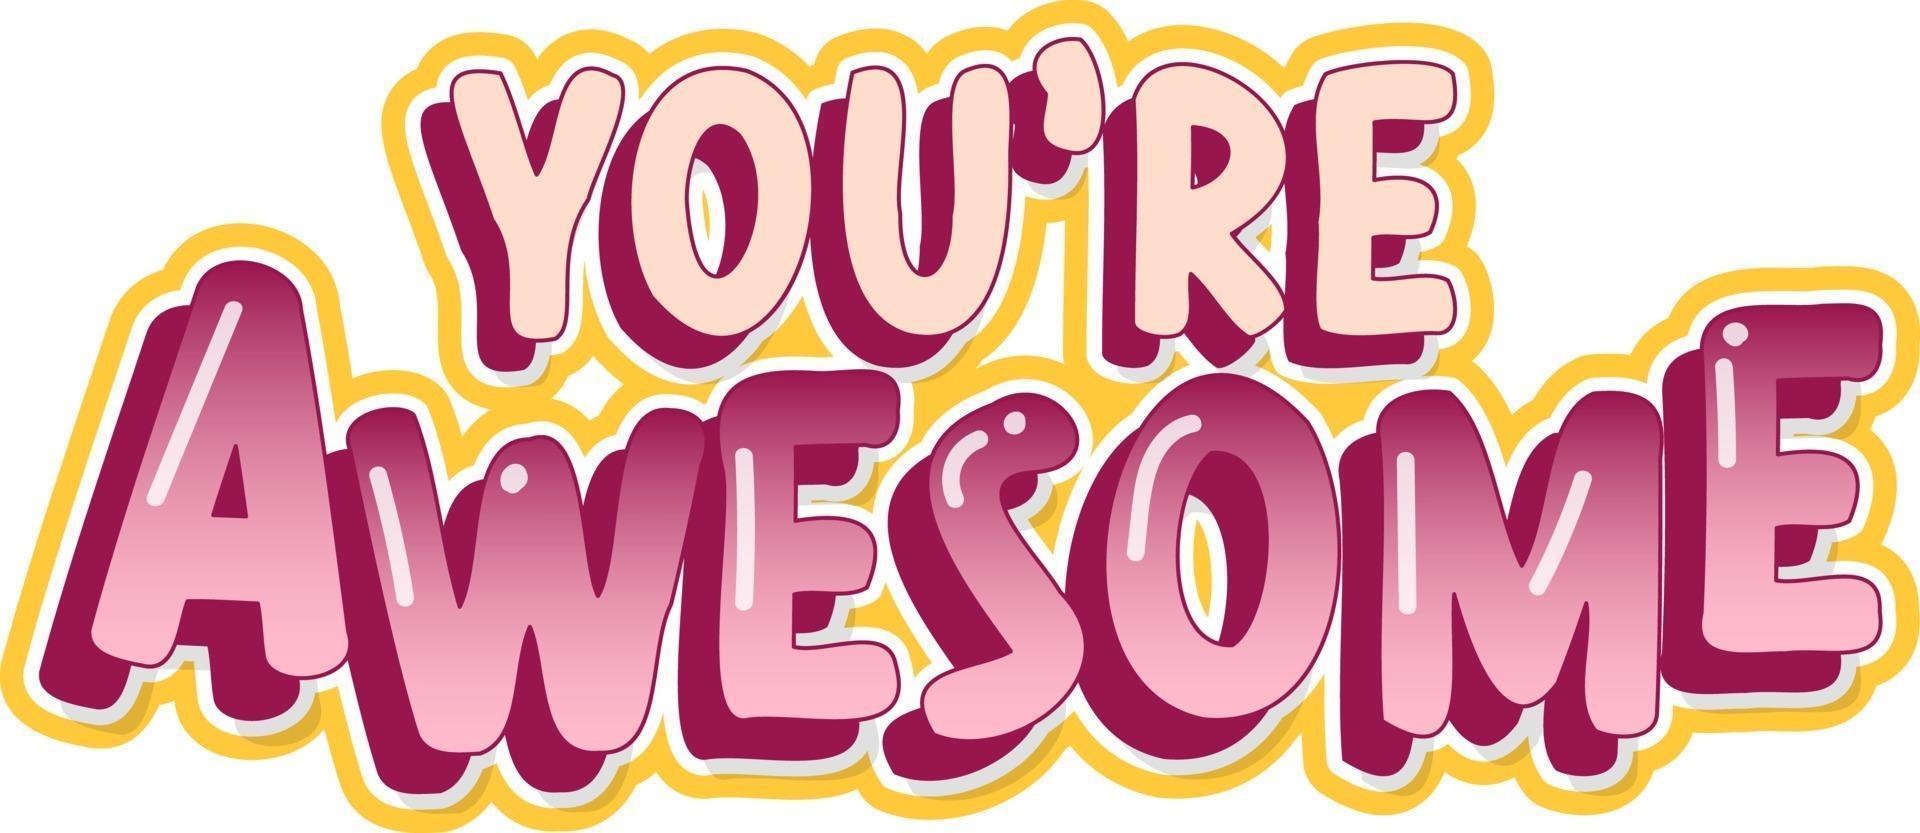 You are awesome font cartoon text vector